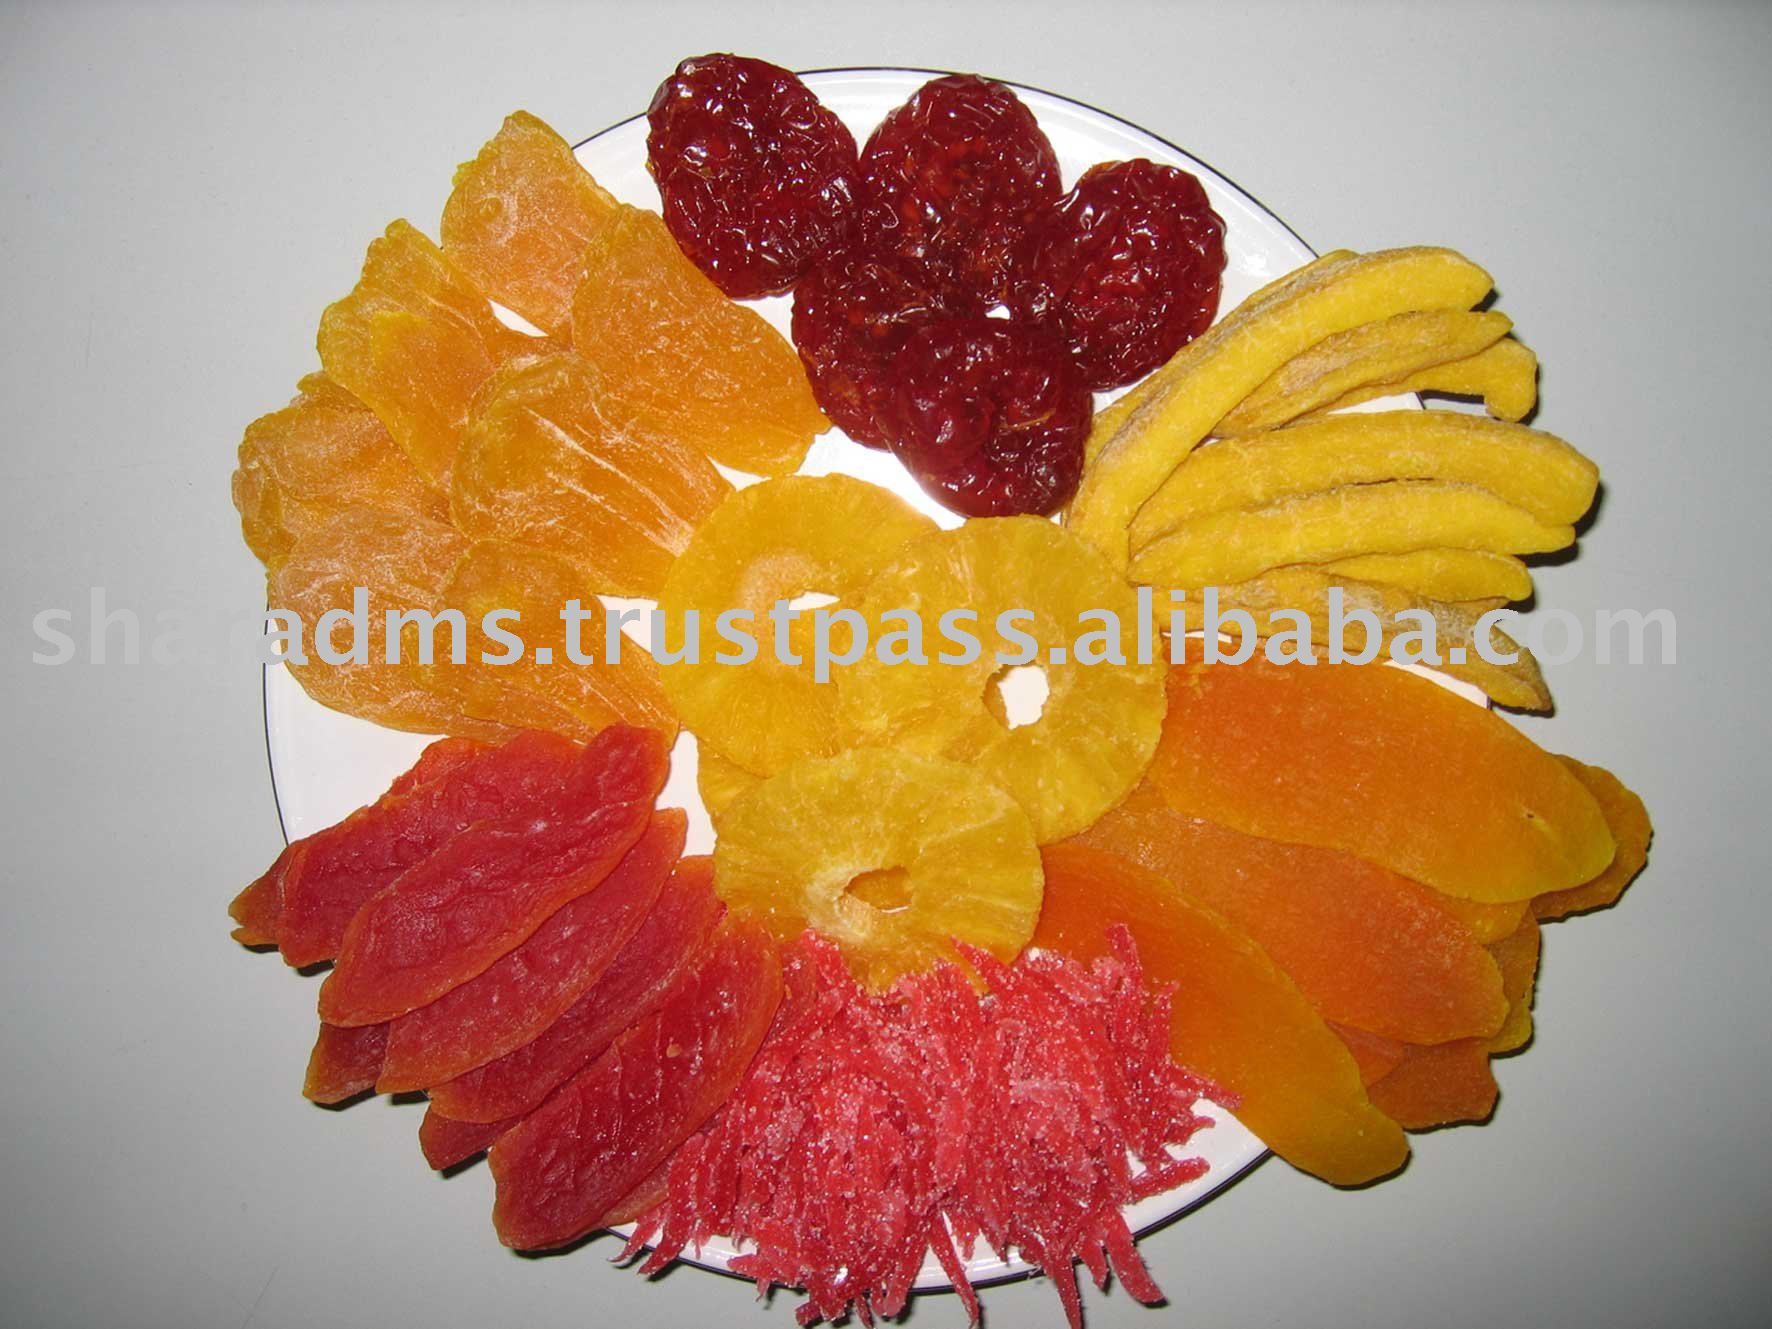 dry-fruits-kinds-of-dry-fruits